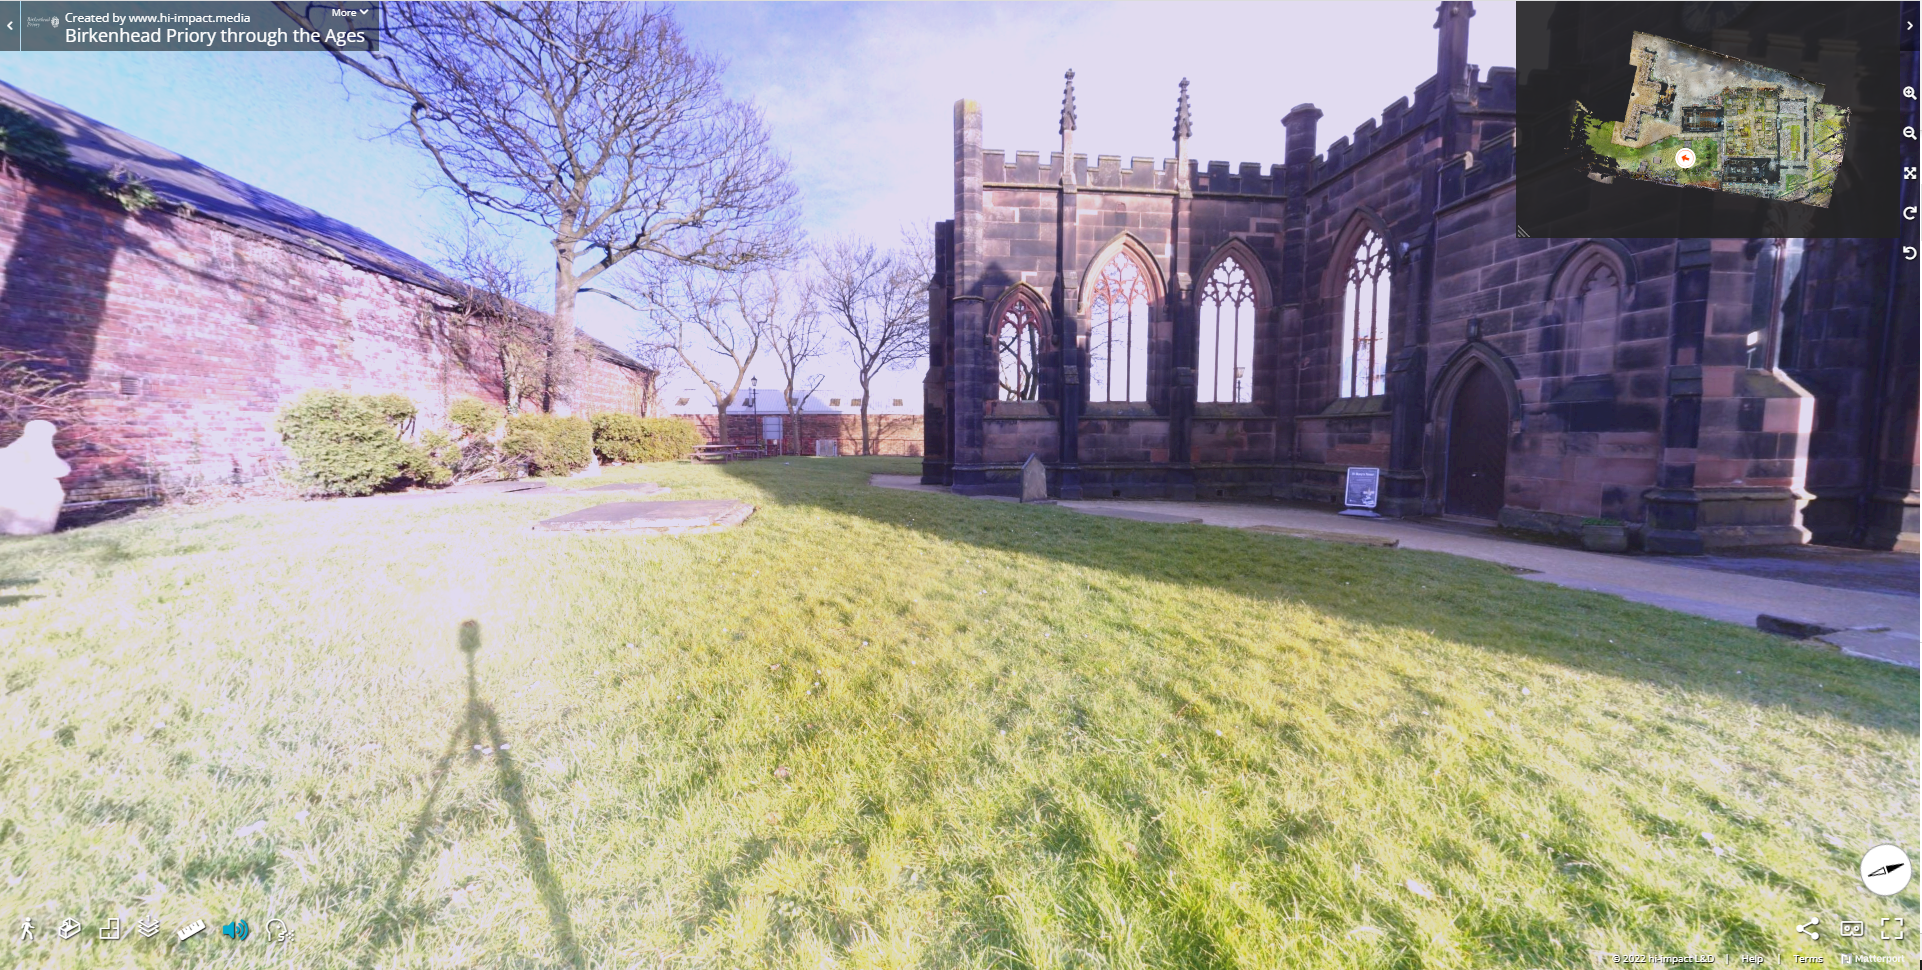 BLK360 scan of the courtyard at Birkenhead Priory